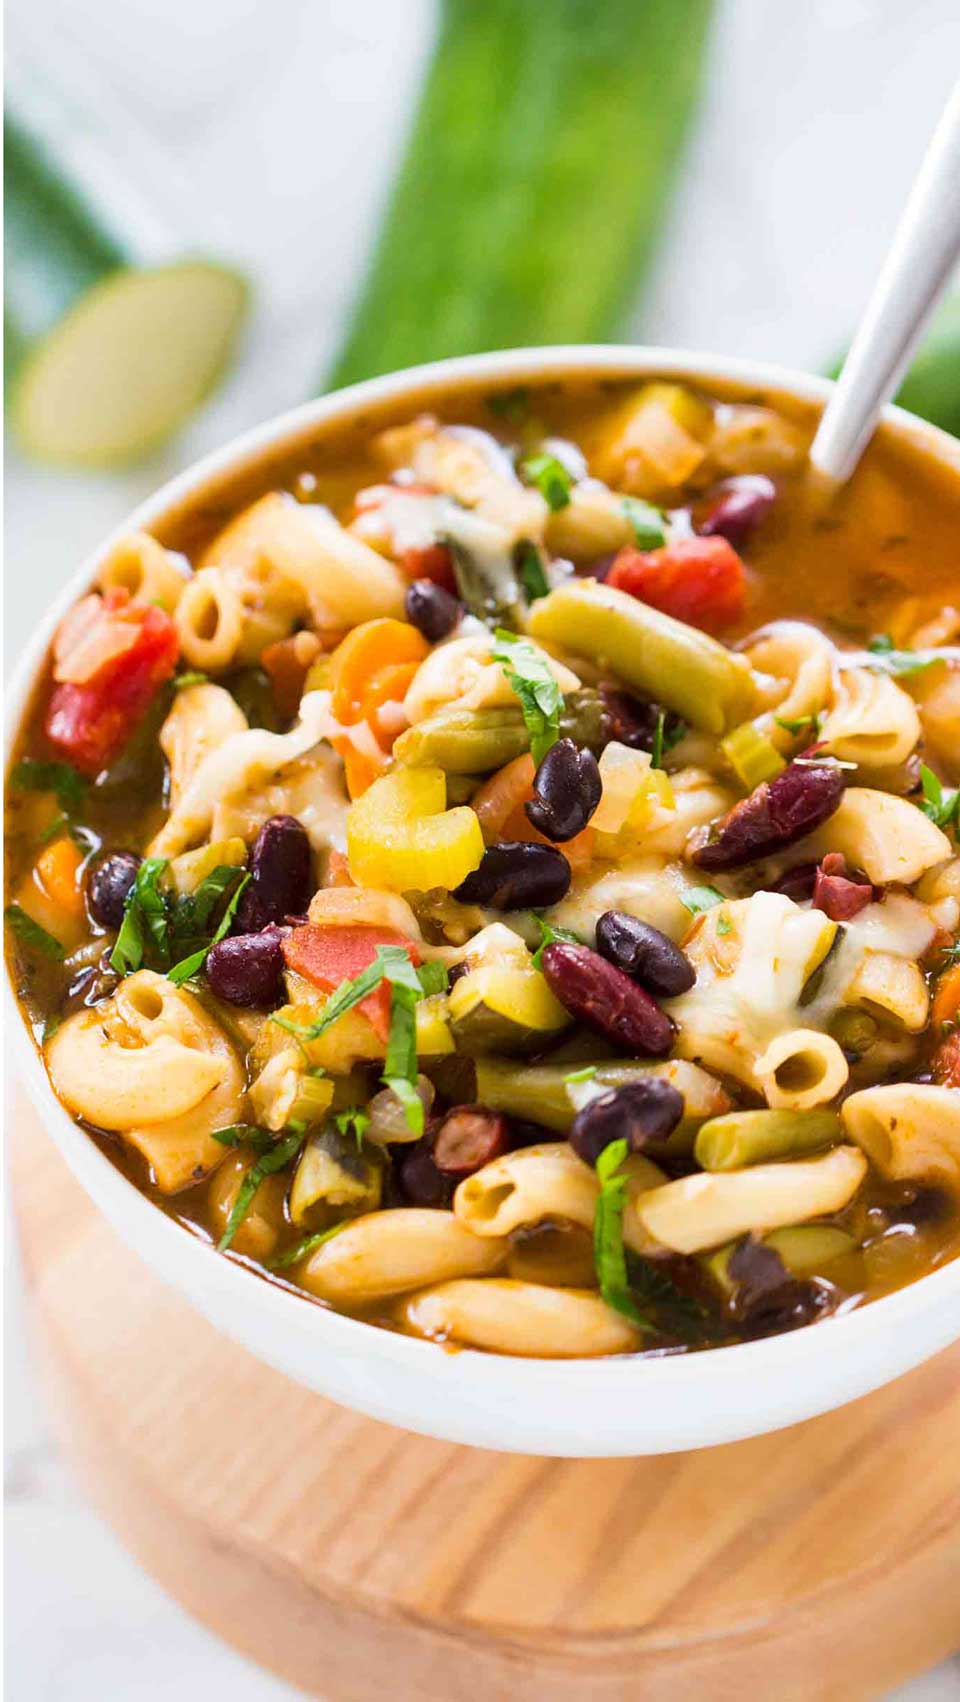 This vegetarian Instant Pot Minestrone Soup from Catalina at Sweet & Savory Meals comes with lots of delicious options – like swapping the spinach for kale or subbing in more nutritious whole-grain pasta! Be sure to check out all the other healthy Instant Pot Vegetable Soups we’ve picked out for you, too!